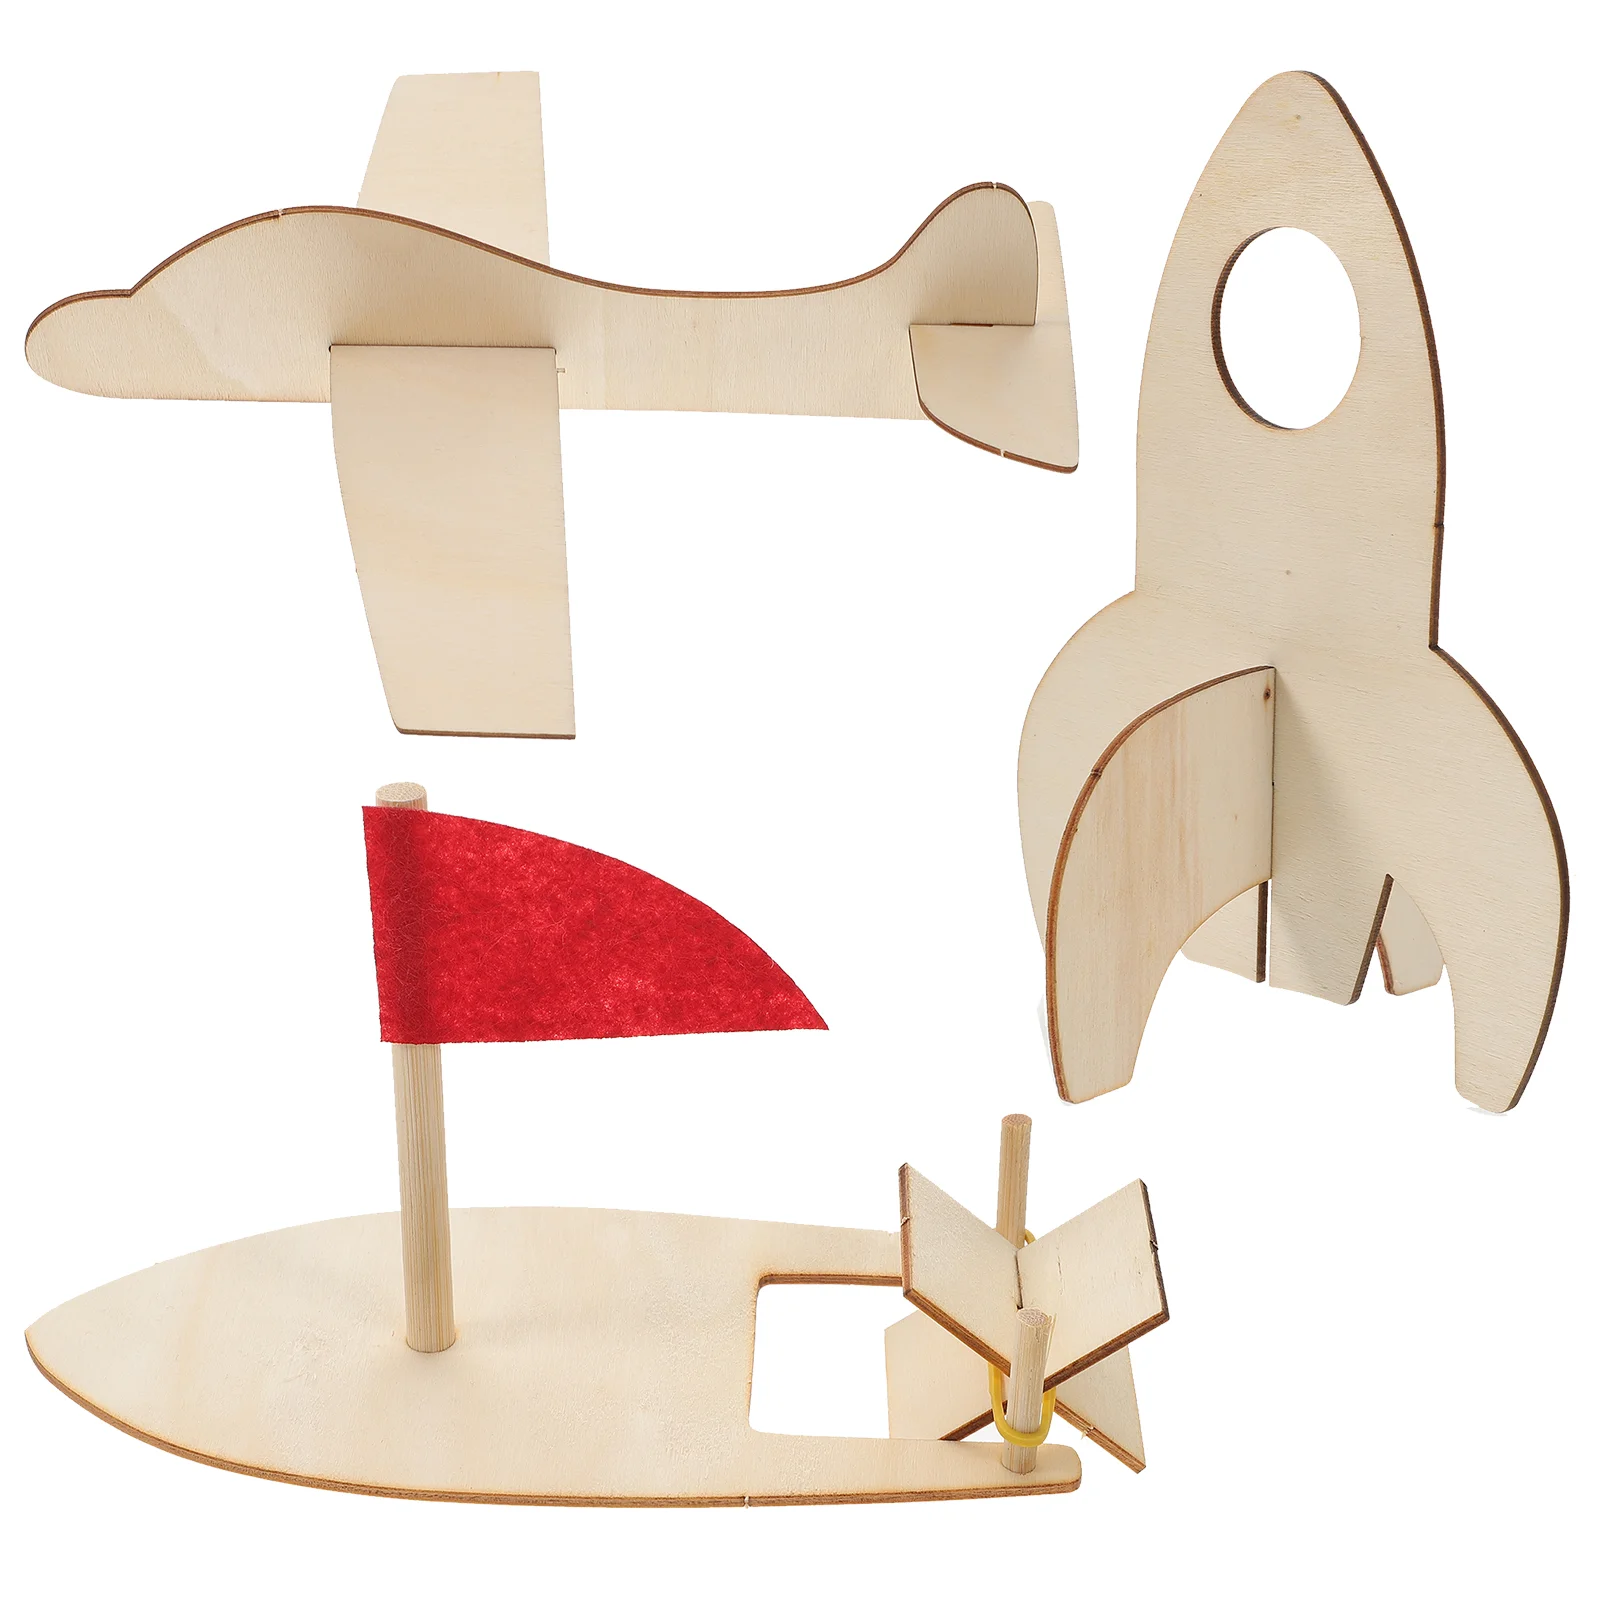 

3 Pcs DIY Graffiti Model Plane Toy Wood Airplane Toys Airplanes 3d Wooden Puzzle Mini Airship Blank